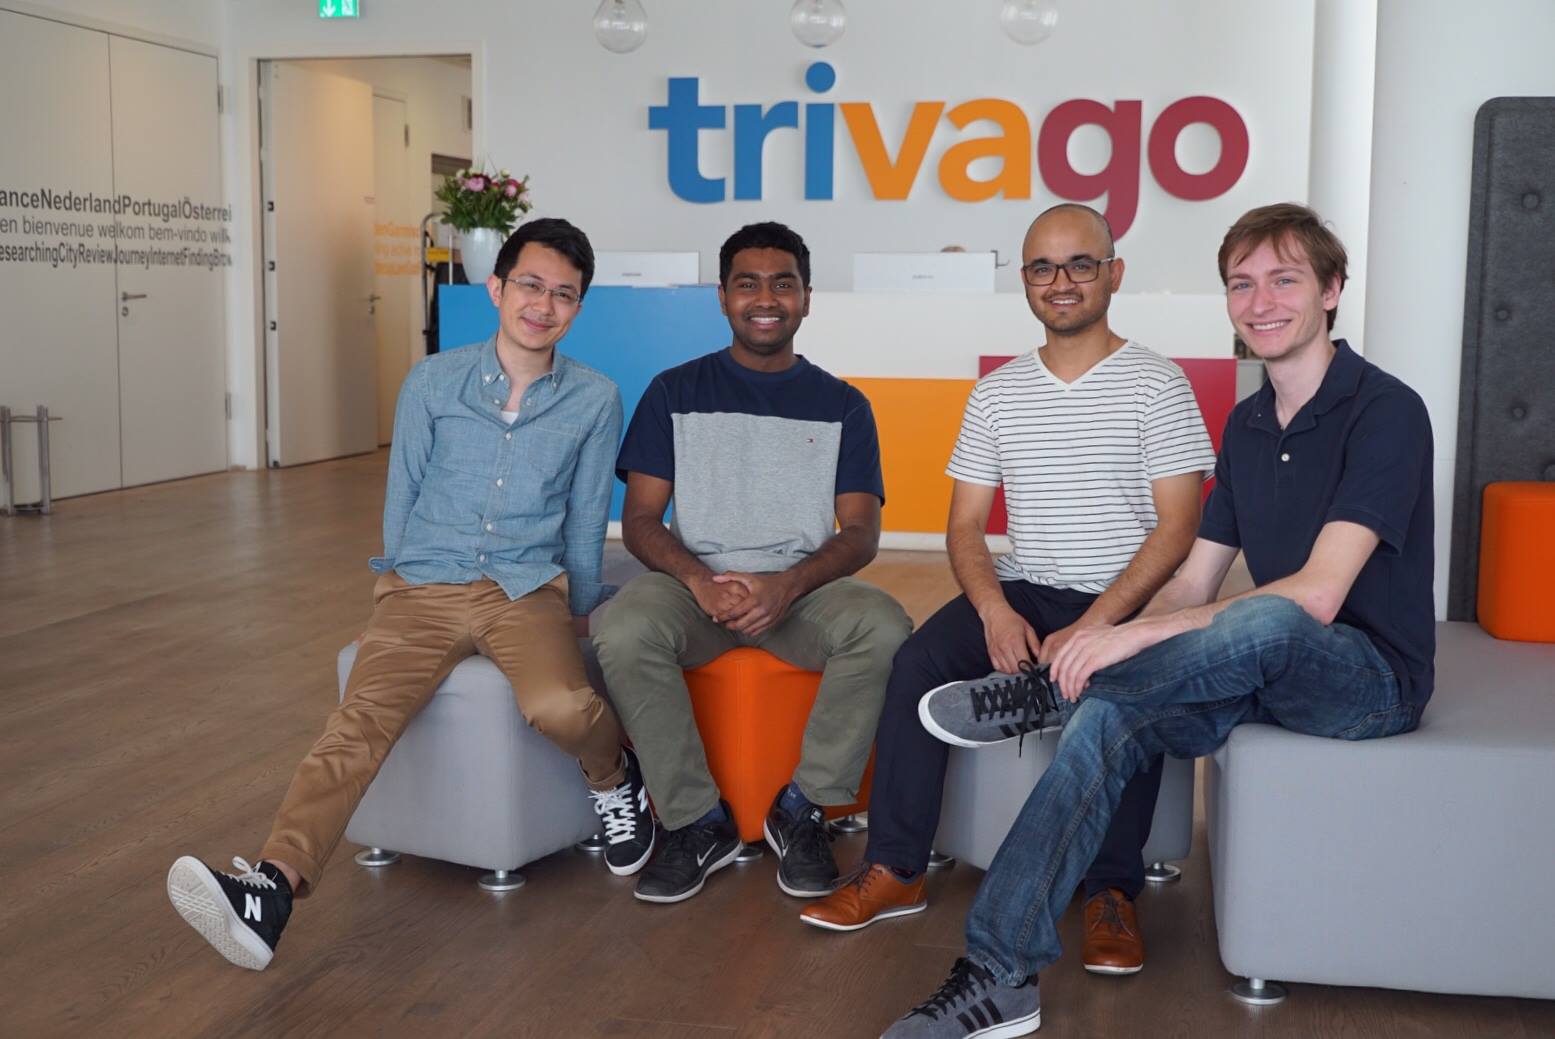 Read Interview with the Winners of trivago's New York Hackathon